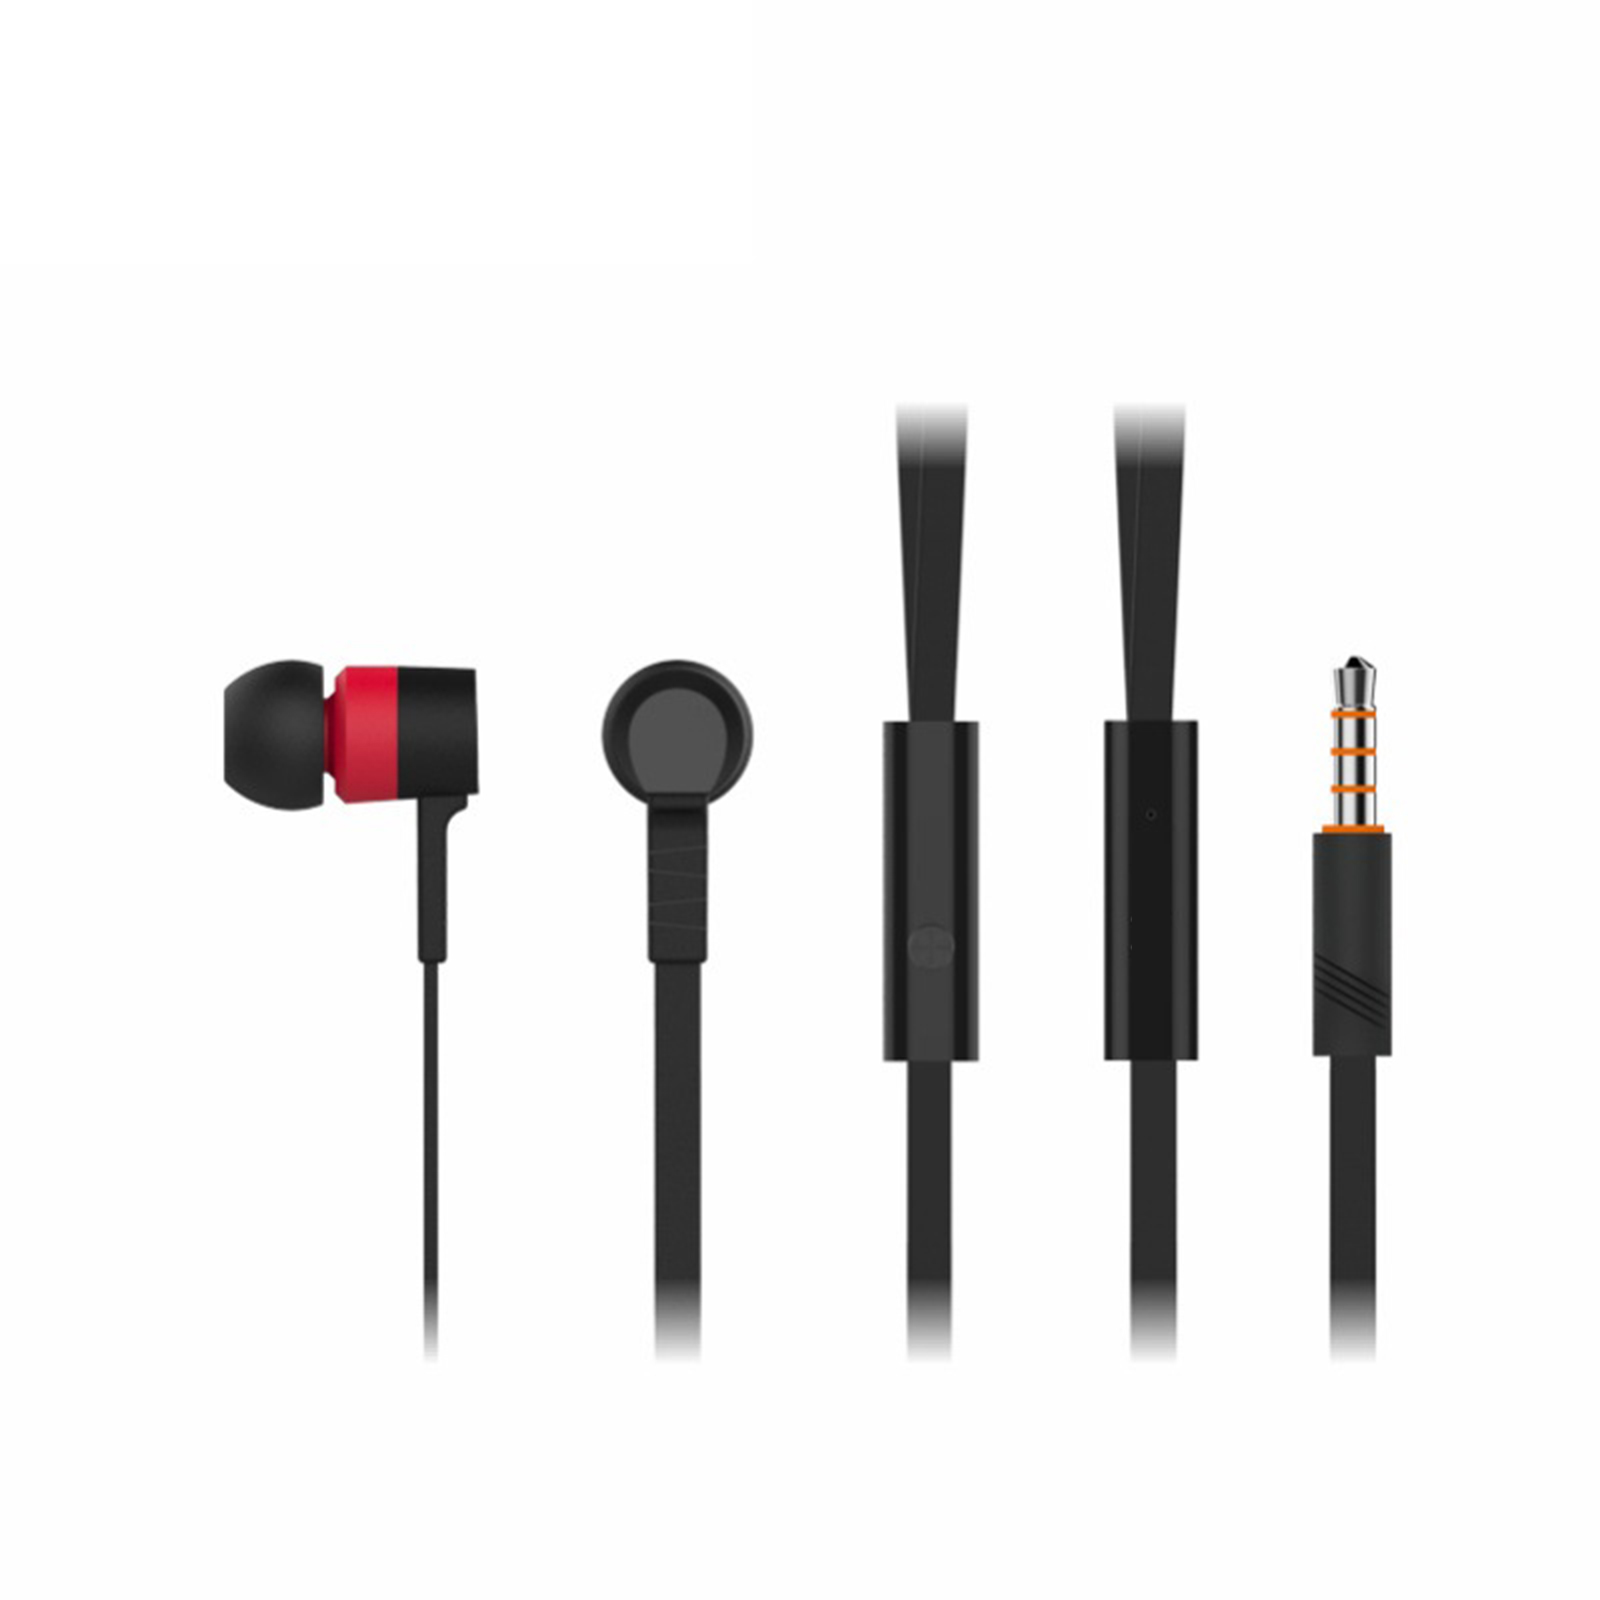 Celebrat D2 Wired Earbuds In-Ear Headphones Heavy Bass Earphones Noise Isolating Wired Earbuds For All 3.5mm Jack Device red